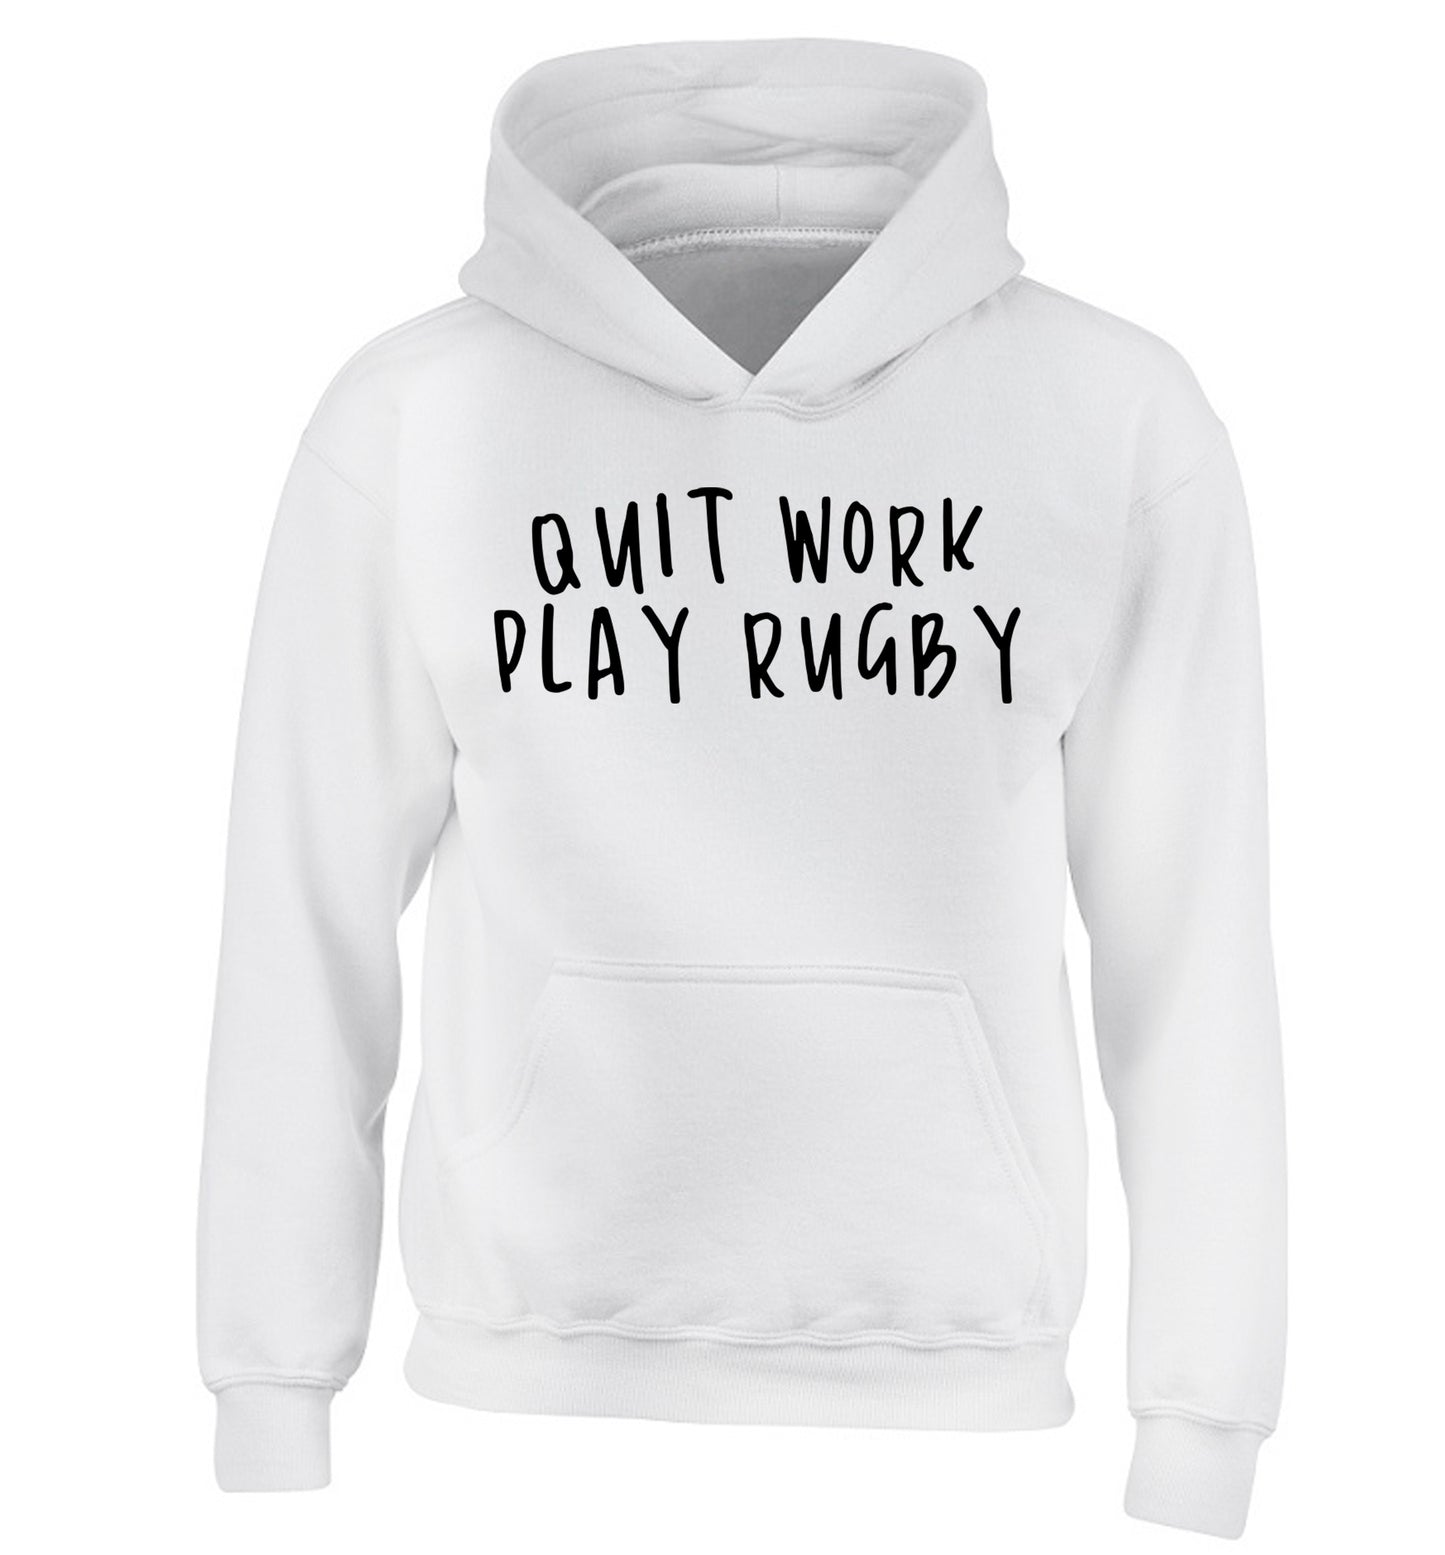 Quit work play rugby children's white hoodie 12-13 Years